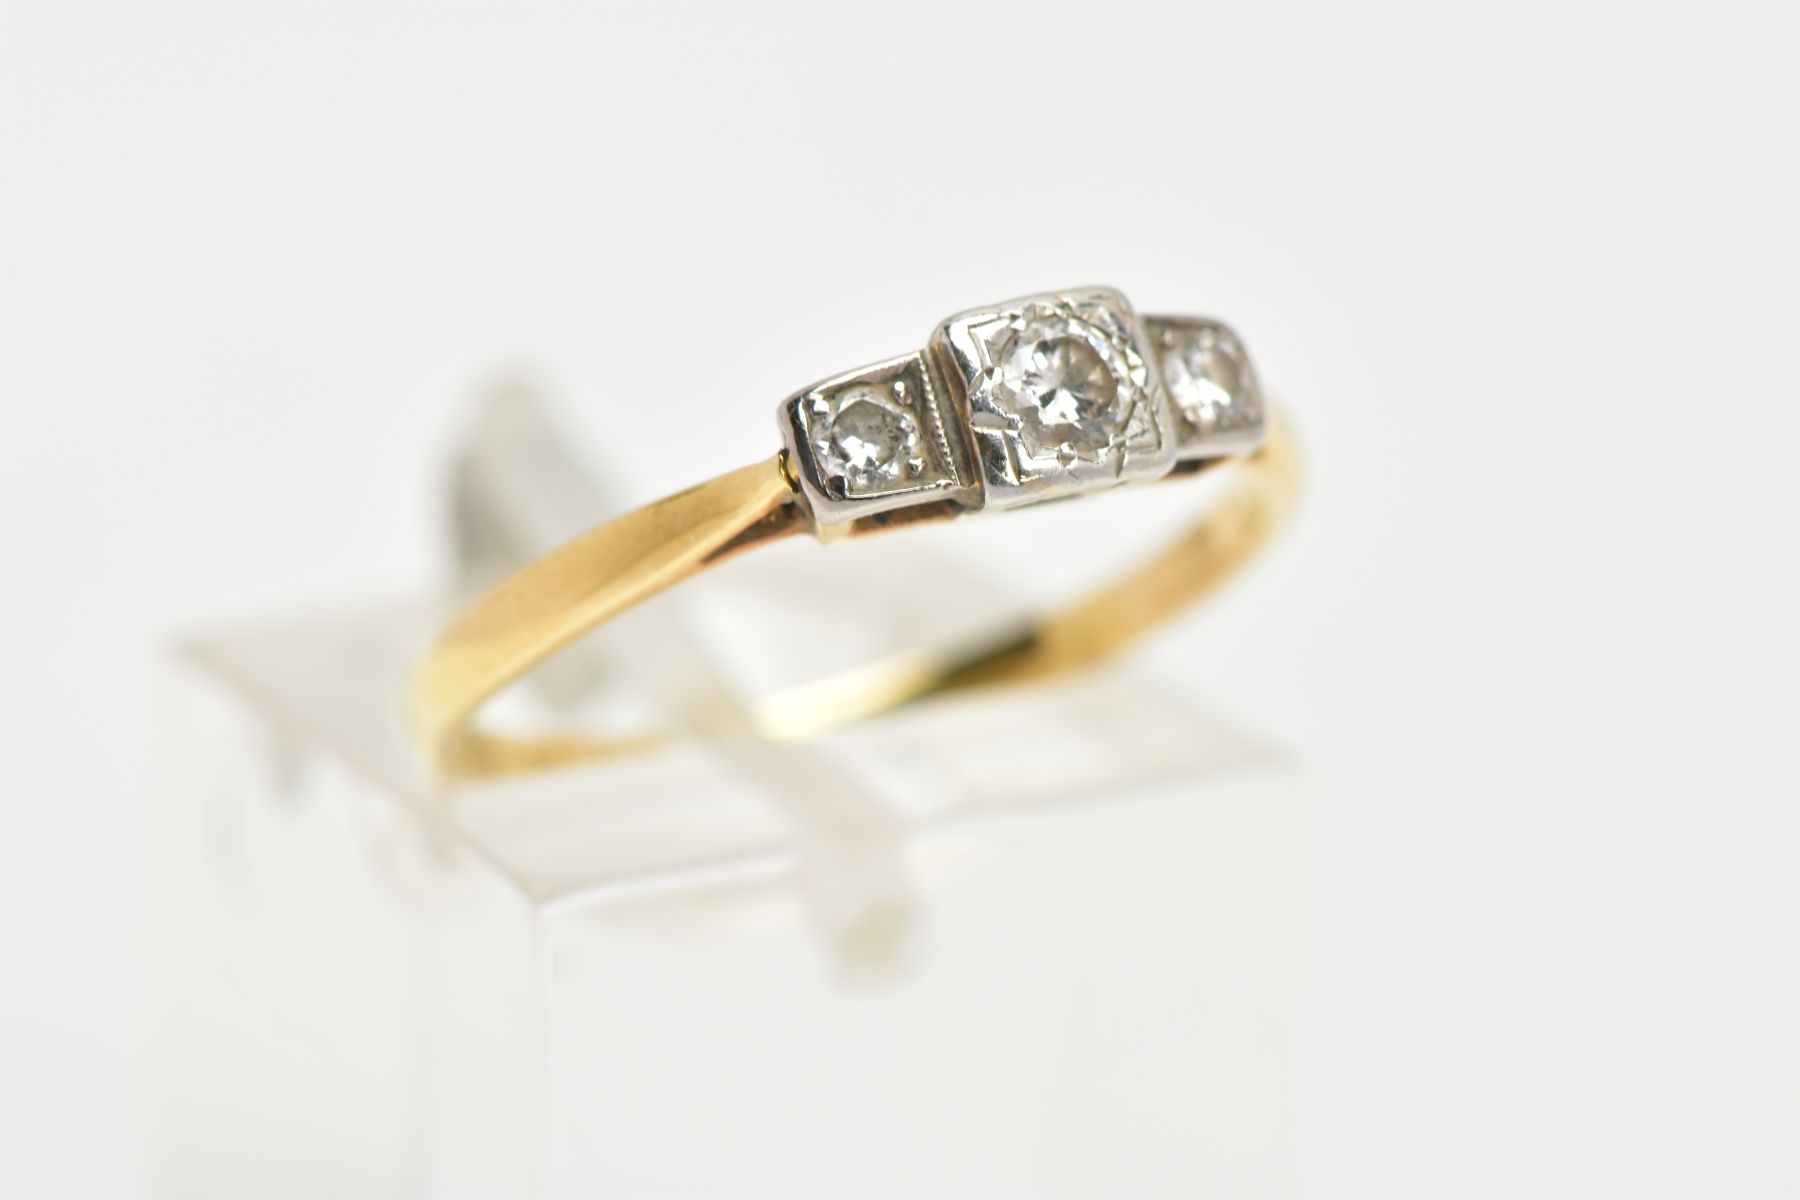 A YELLOW METAL THREE STONE DIAMOND RING, centring on a round brilliant cut diamond within a square - Image 4 of 4